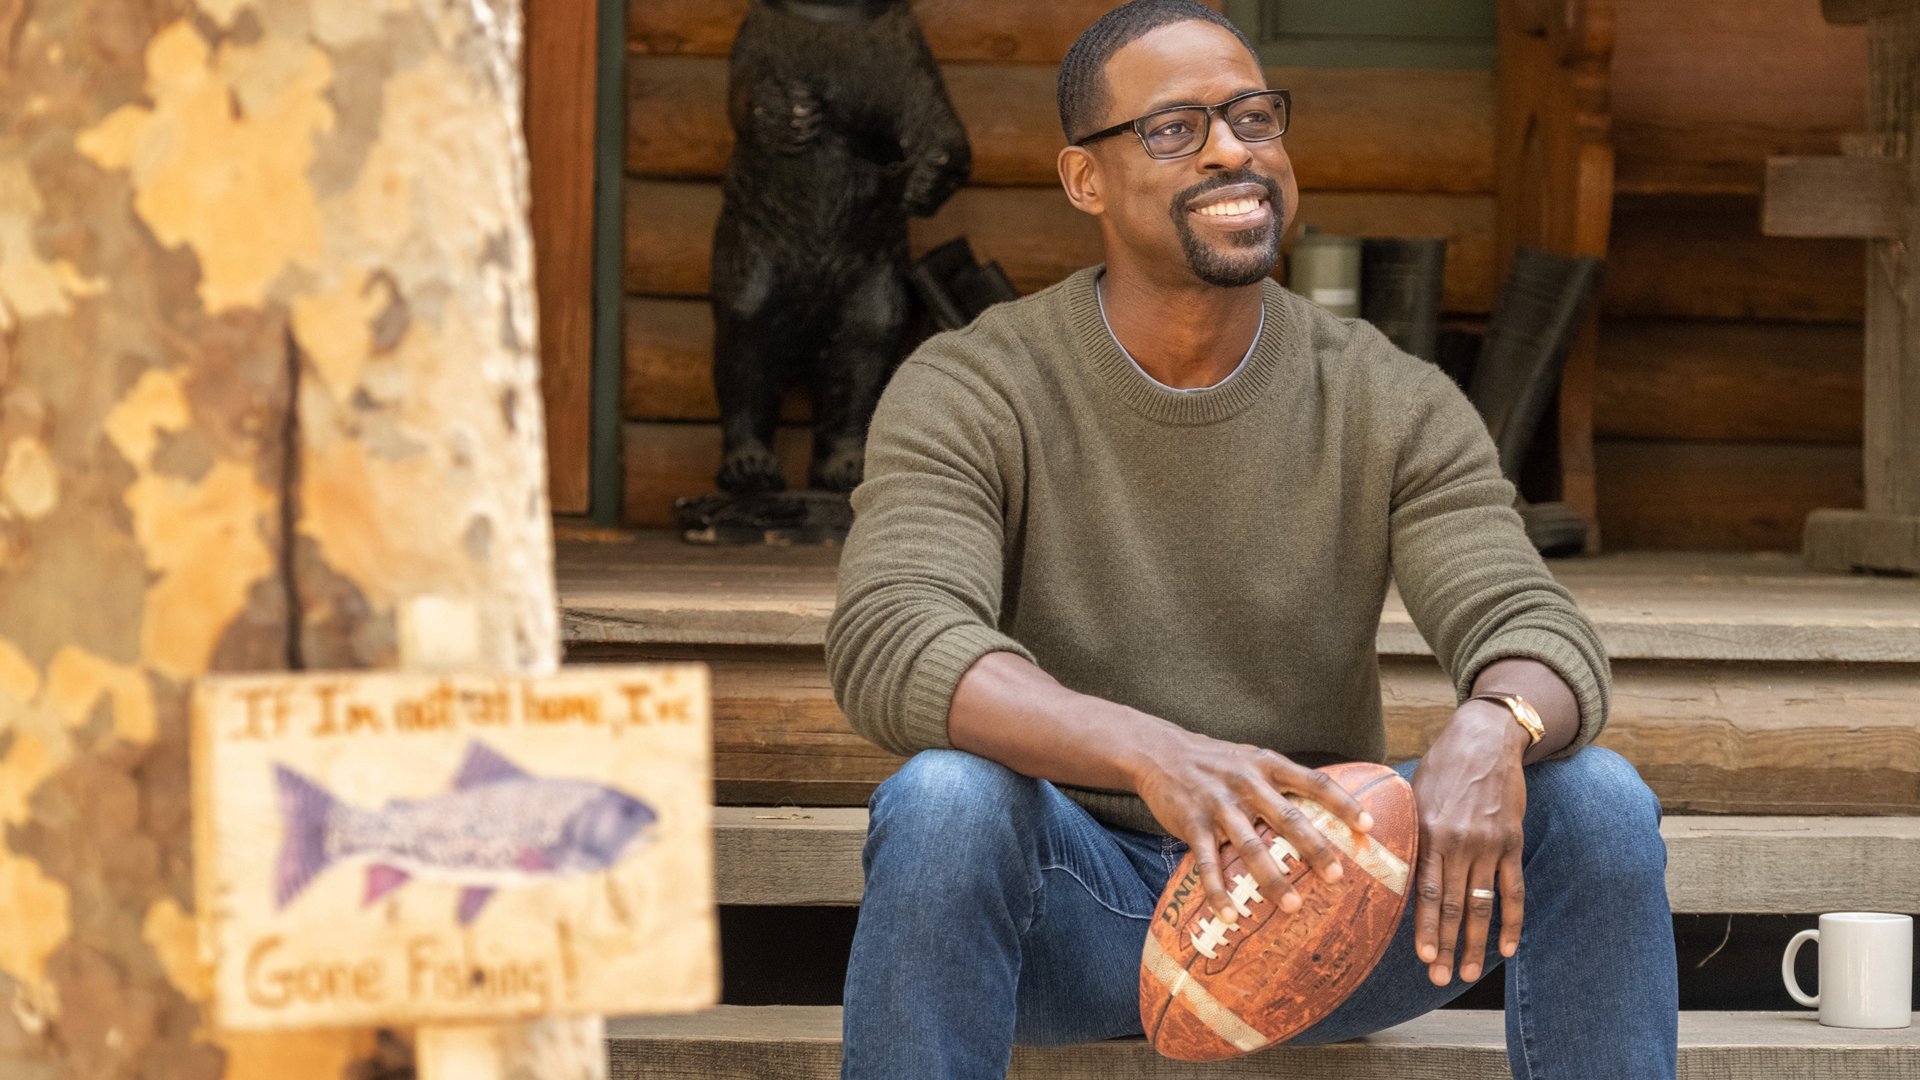 Sterling K. Brown as Randall Pearson holding a football and smiling in ‘This Is Us’ Season 5 Episode 15